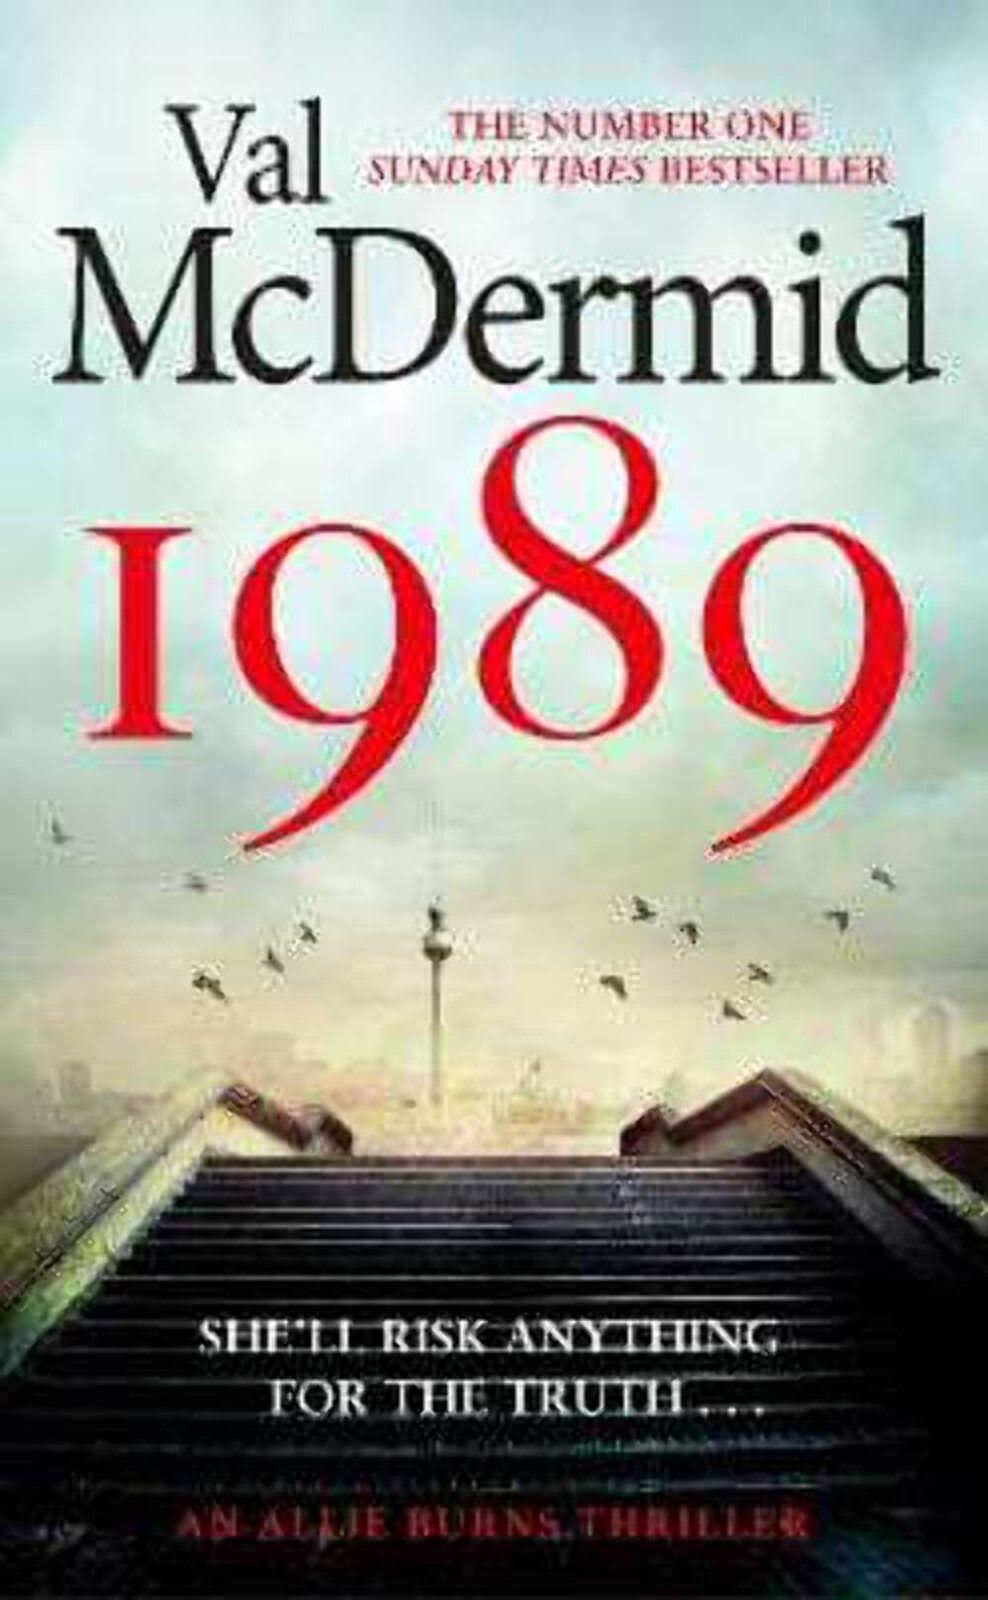 1989: The Brand-New Thriller from the No. 1 Bestseller [Book]